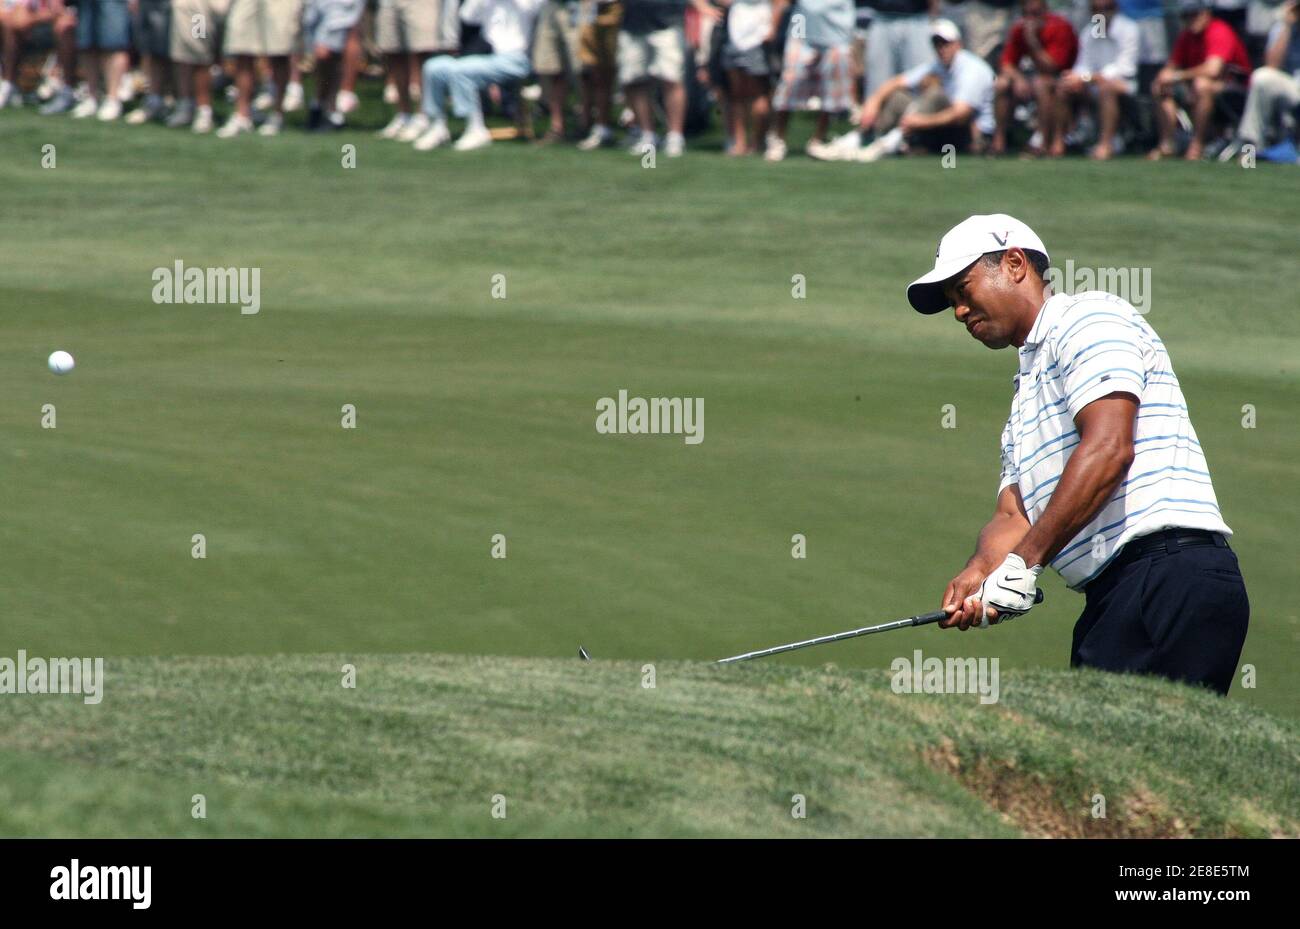 Tiger Woods of the U.S. chips to the sixth green during first round play in the Quail Hollow Championship in Charlotte, North Carolina, April 30, 2009.     REUTERS/Jason Miczek (UNITED STATES SPORT GOLF) Stock Photo